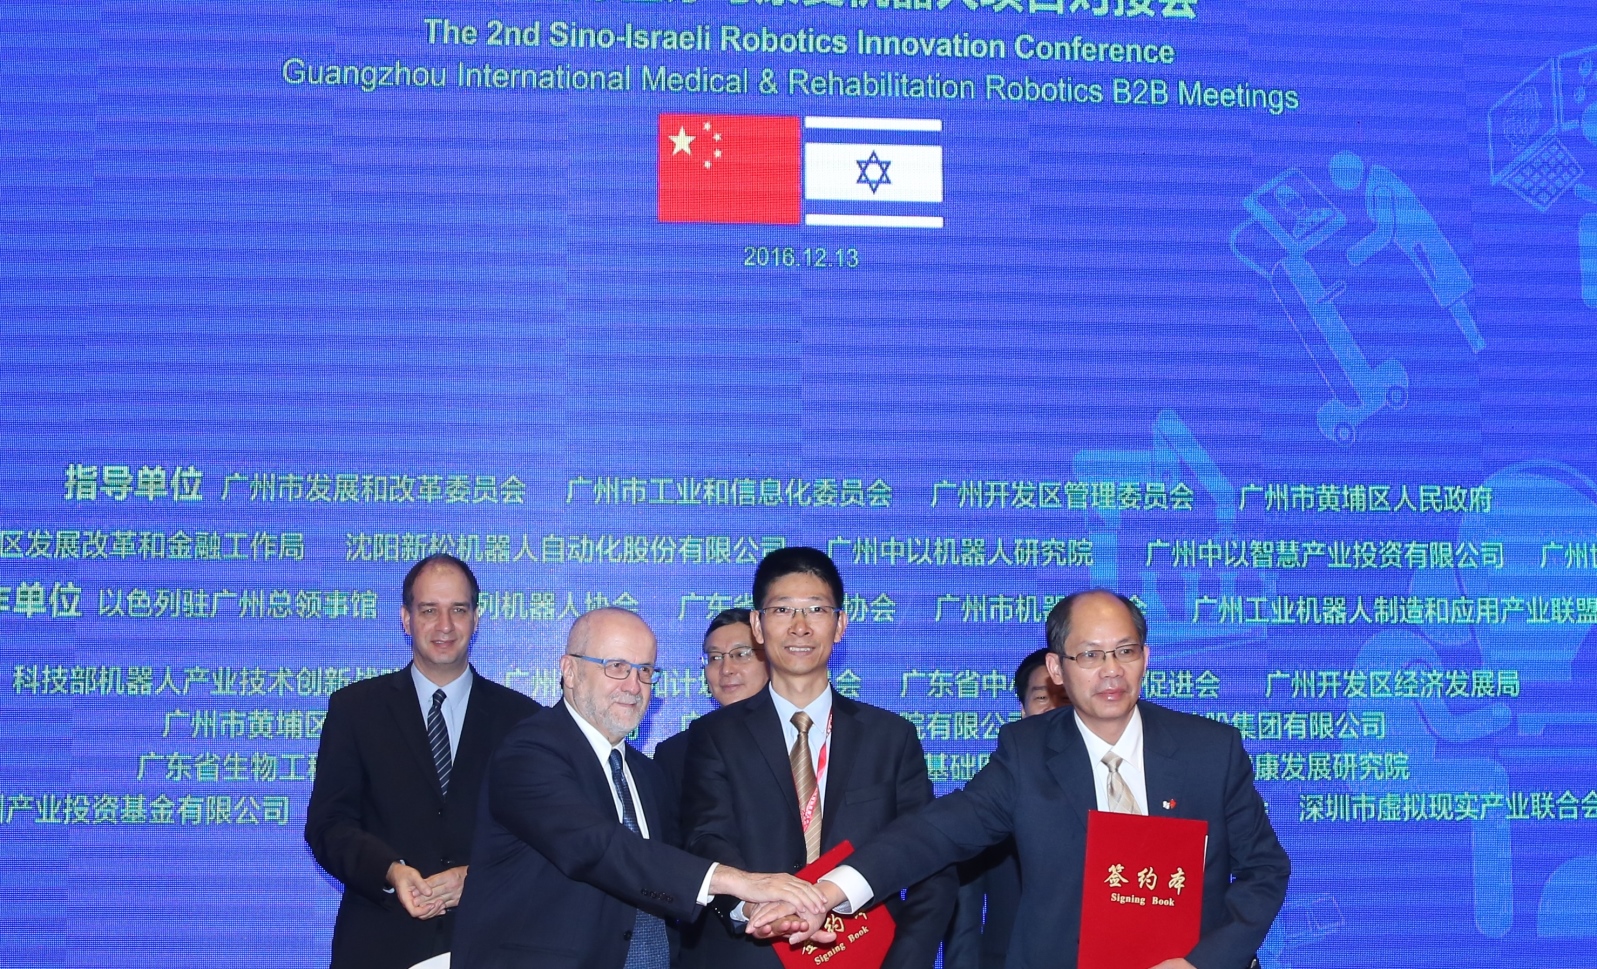 Prof. Zvi Shiller signs a collaborative agreement between GDD, IROB and SIRI, witnessed by Ambassador Nadav Cohen, Consul General of Israel to Guangzhou; Zhiying Chen of the GDD and Huangpu District, and Ouyang Quan, chairman of the Guangzhou Sino-Israeli Robotics Institute. Photo: courtesy